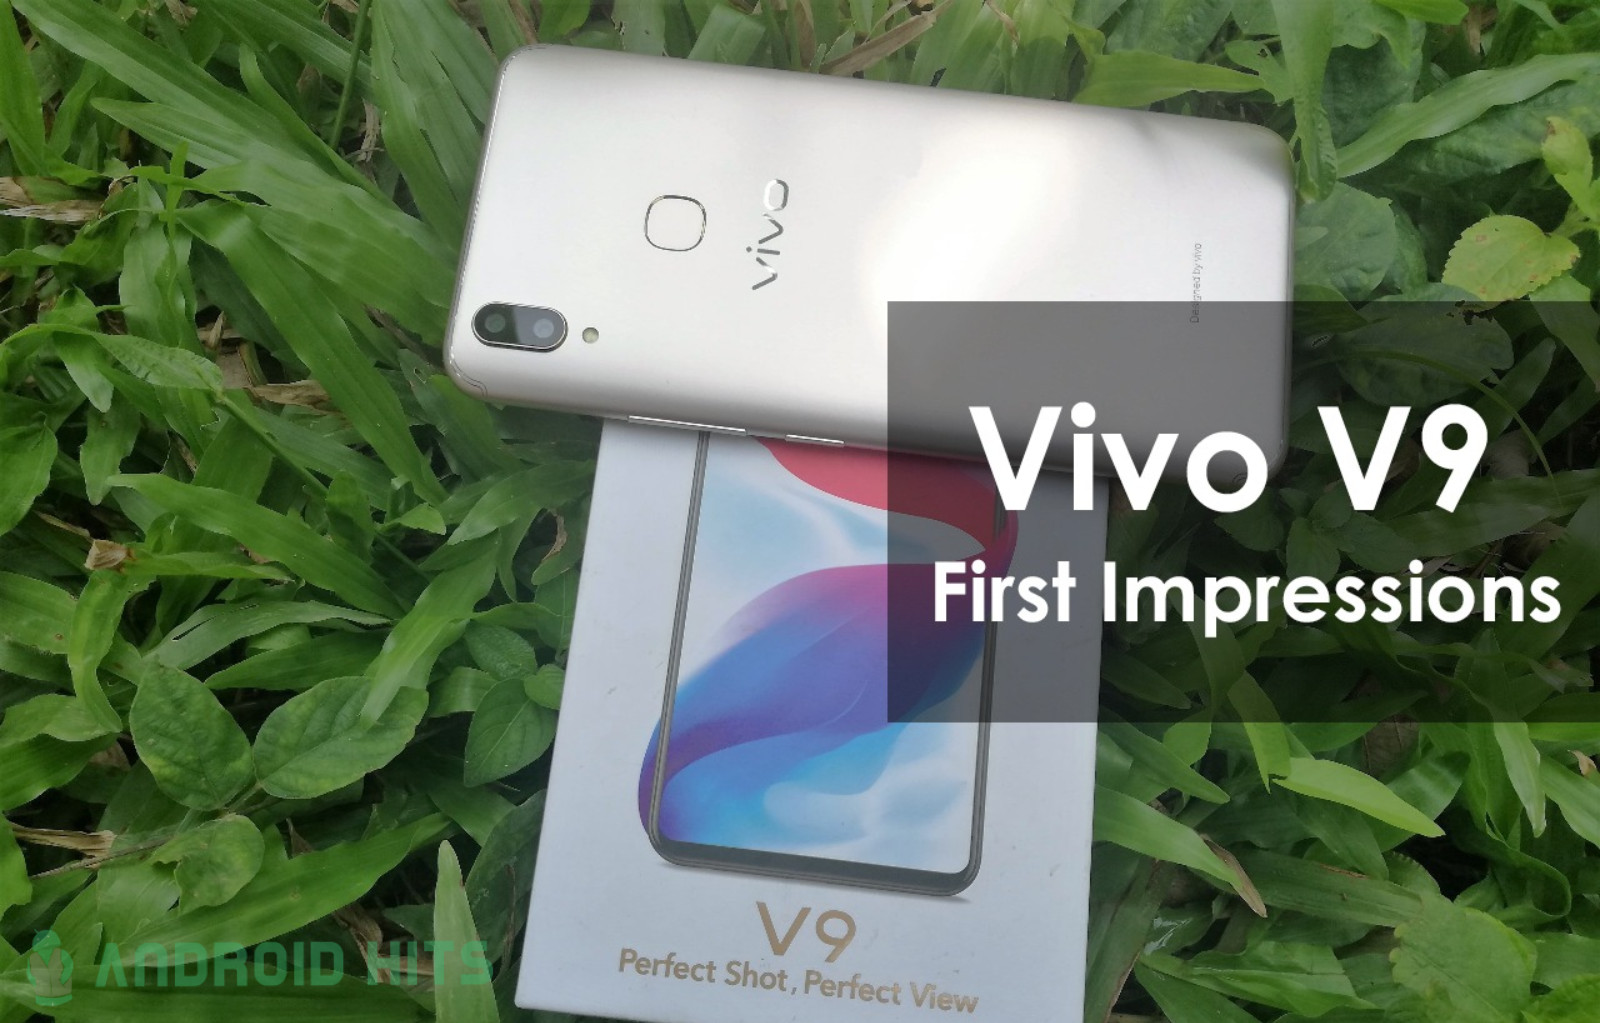 Vivo V9 First Impressions and overview 1